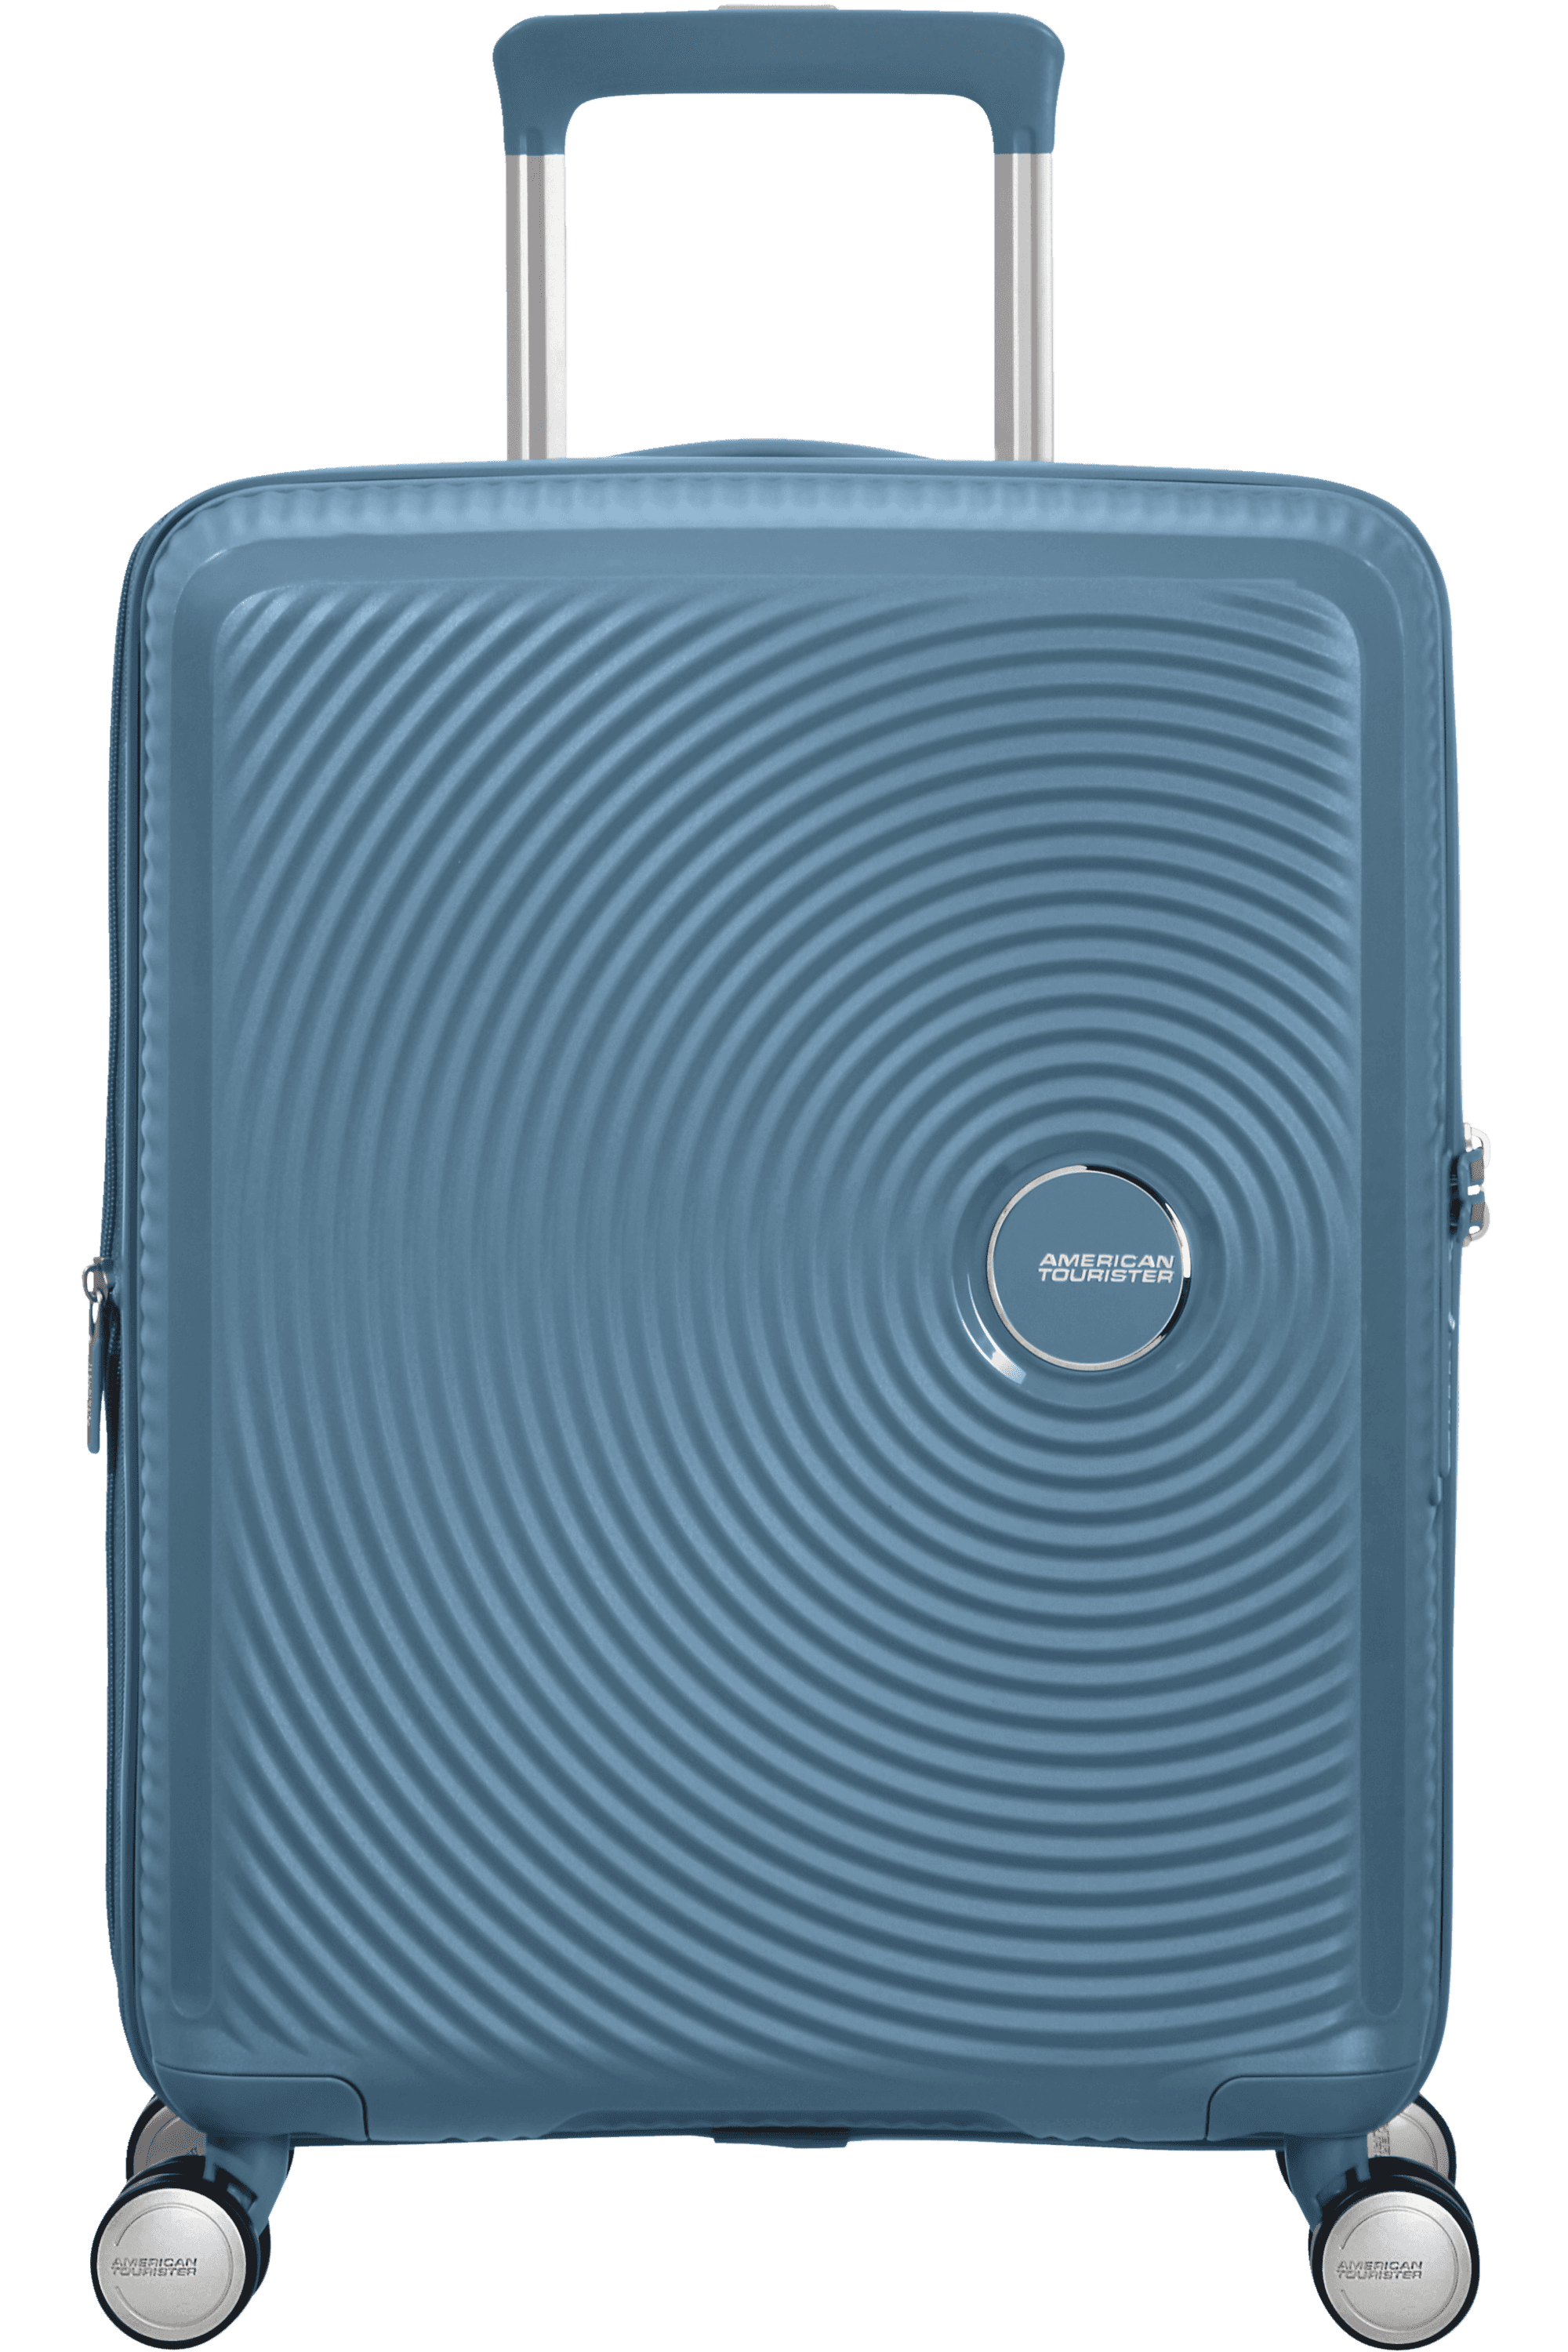 UpBeat Backpack | American Tourister UK